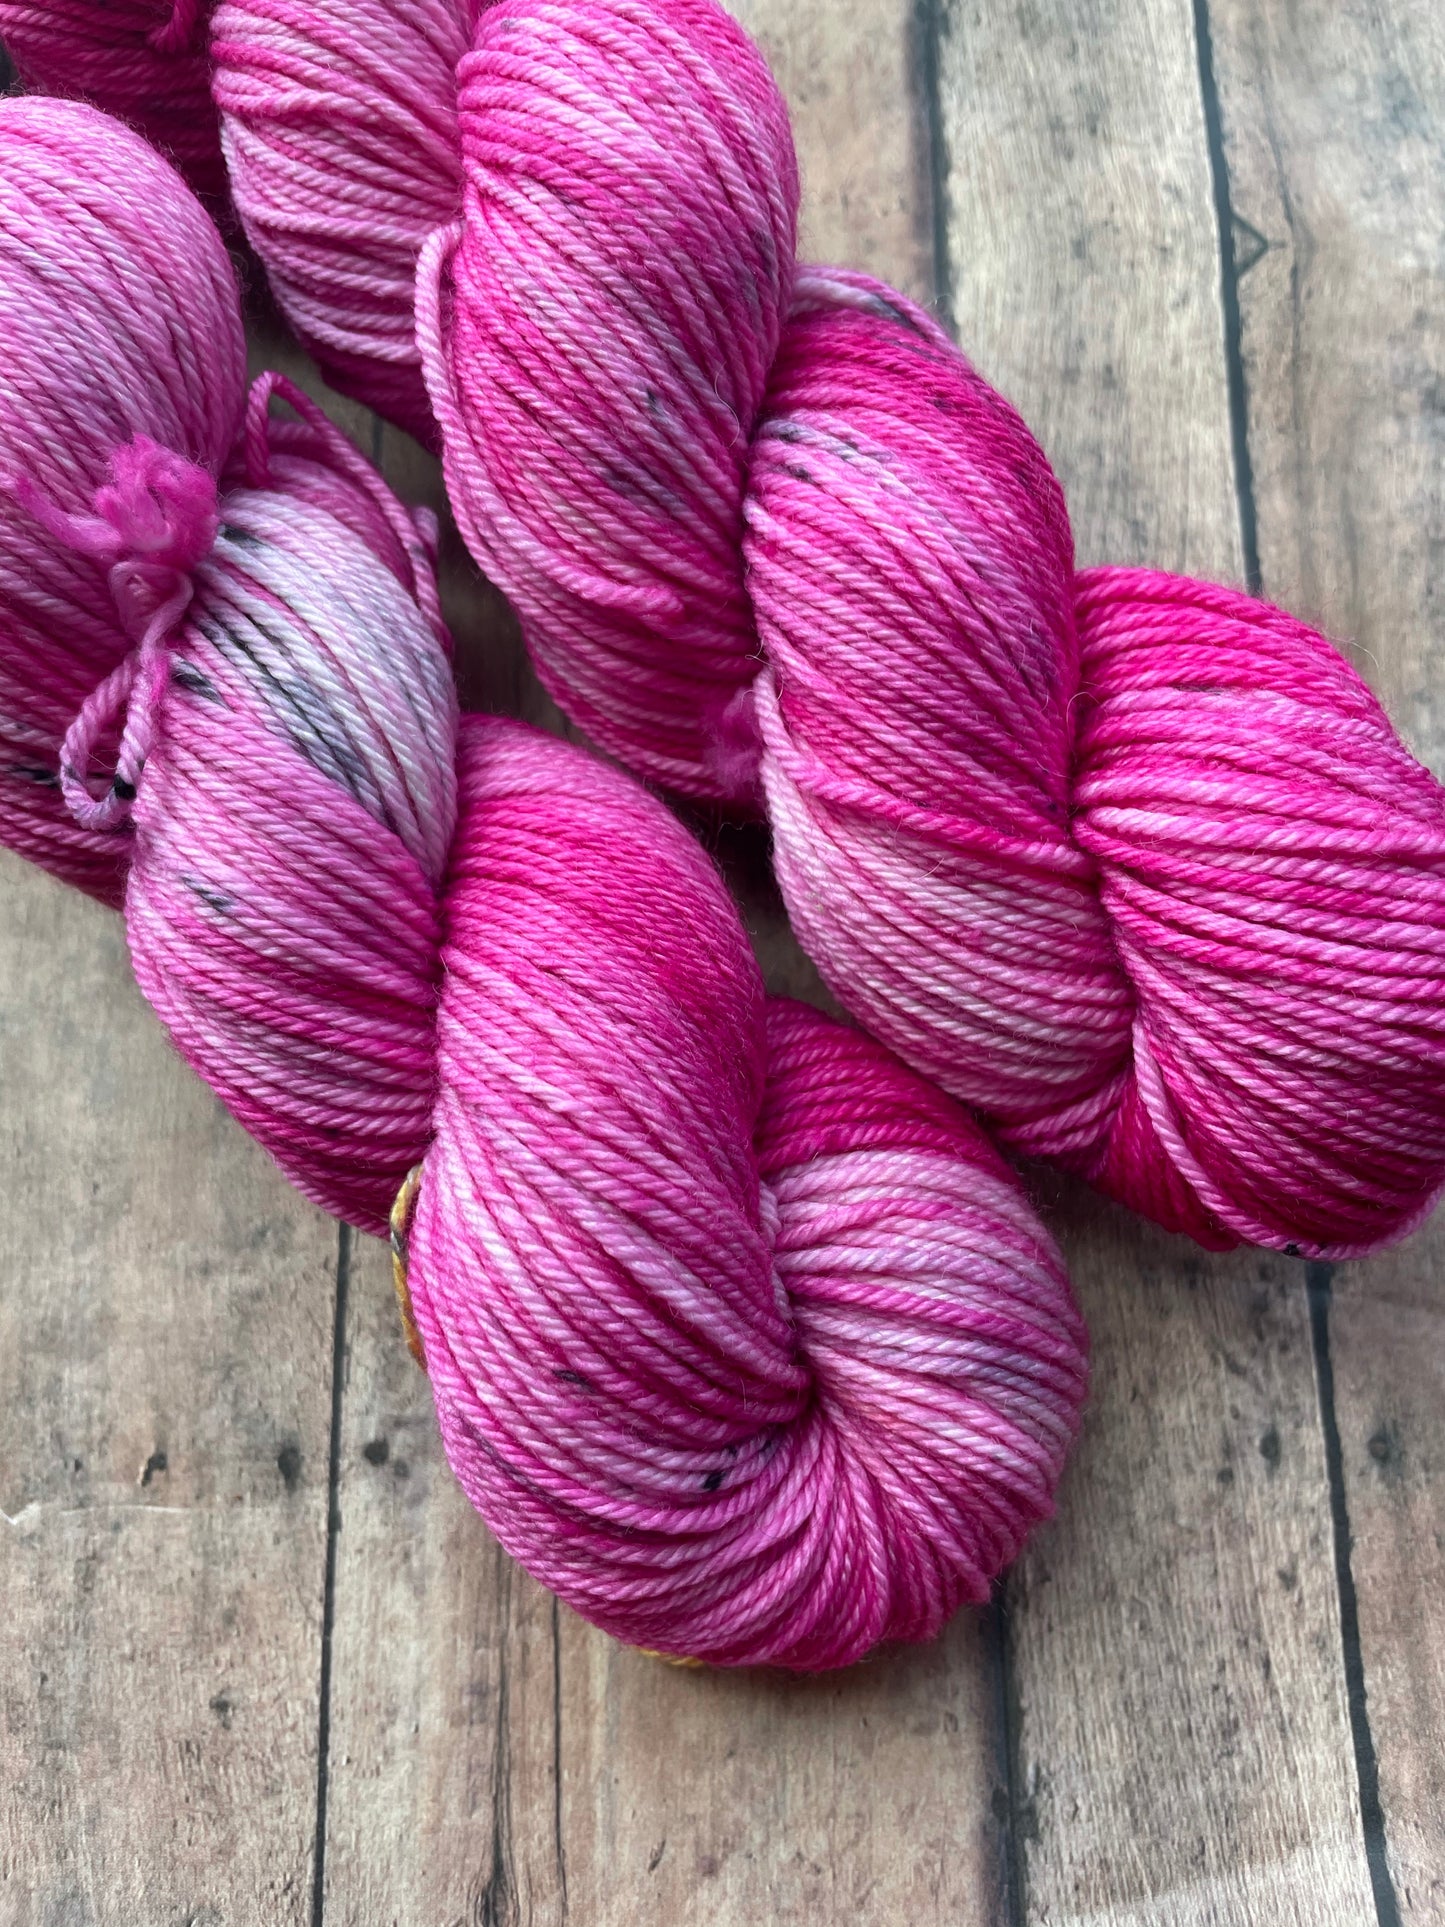 Rambunctious - Drizzy DK - hand dyed yarn